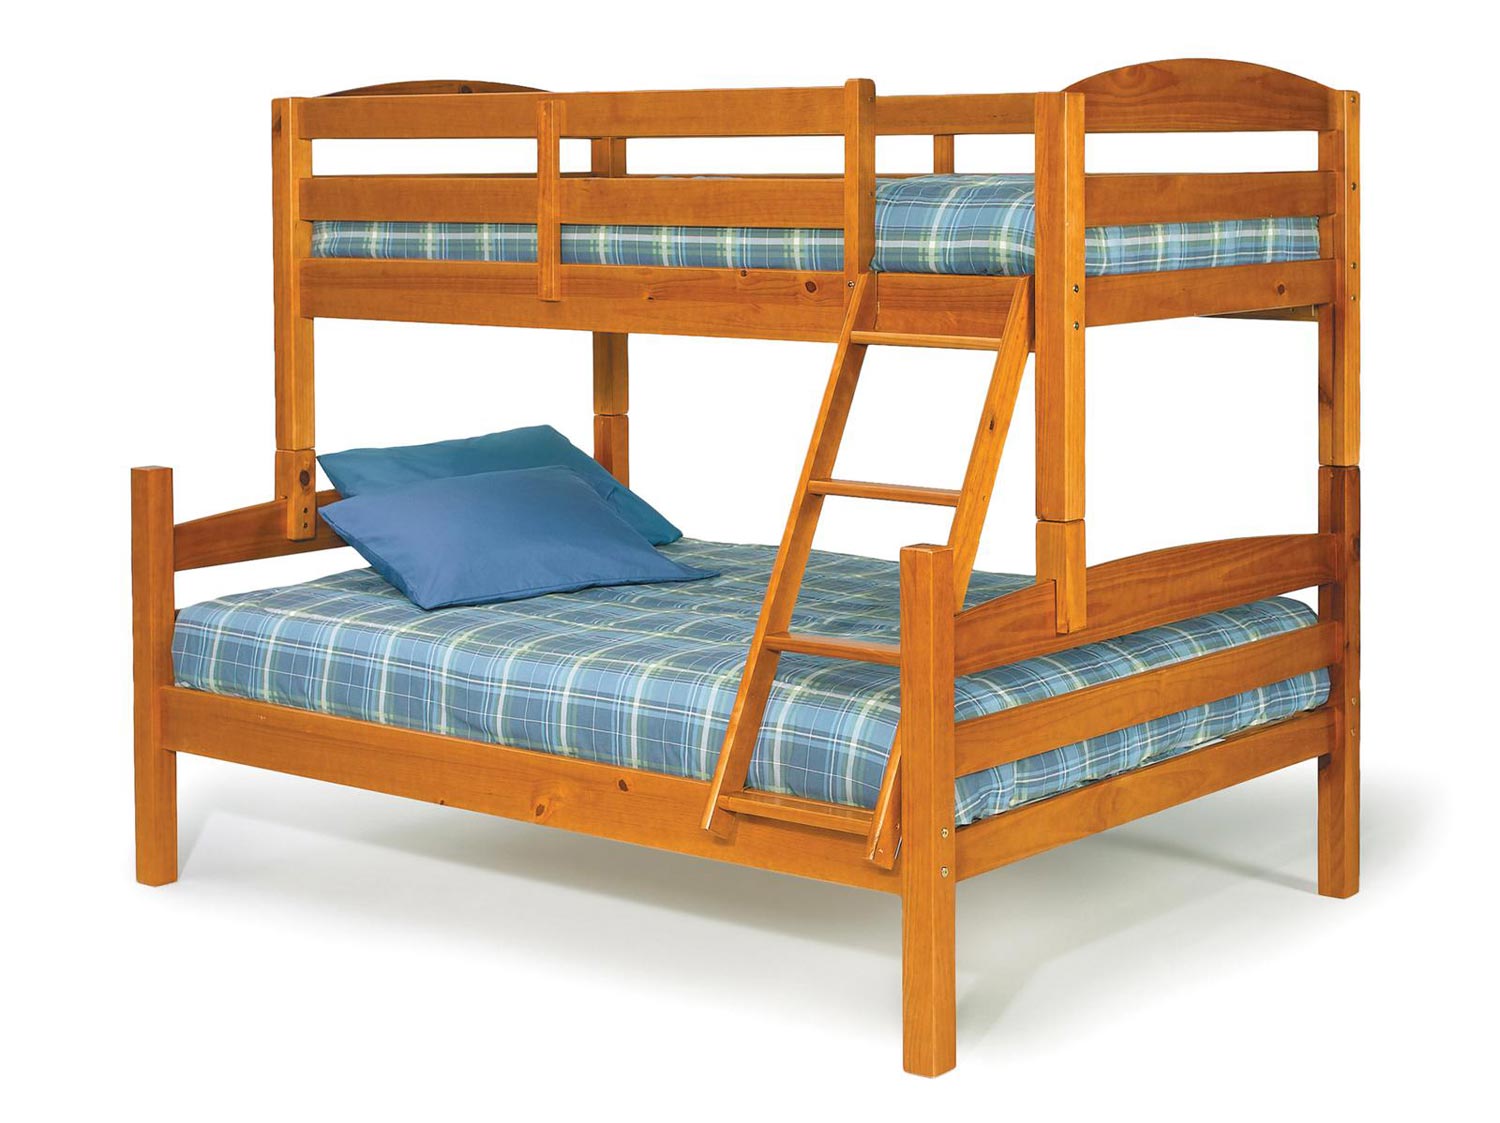 Chelsea Home 3641000 Twin Over Full Bunk Bed - Honey